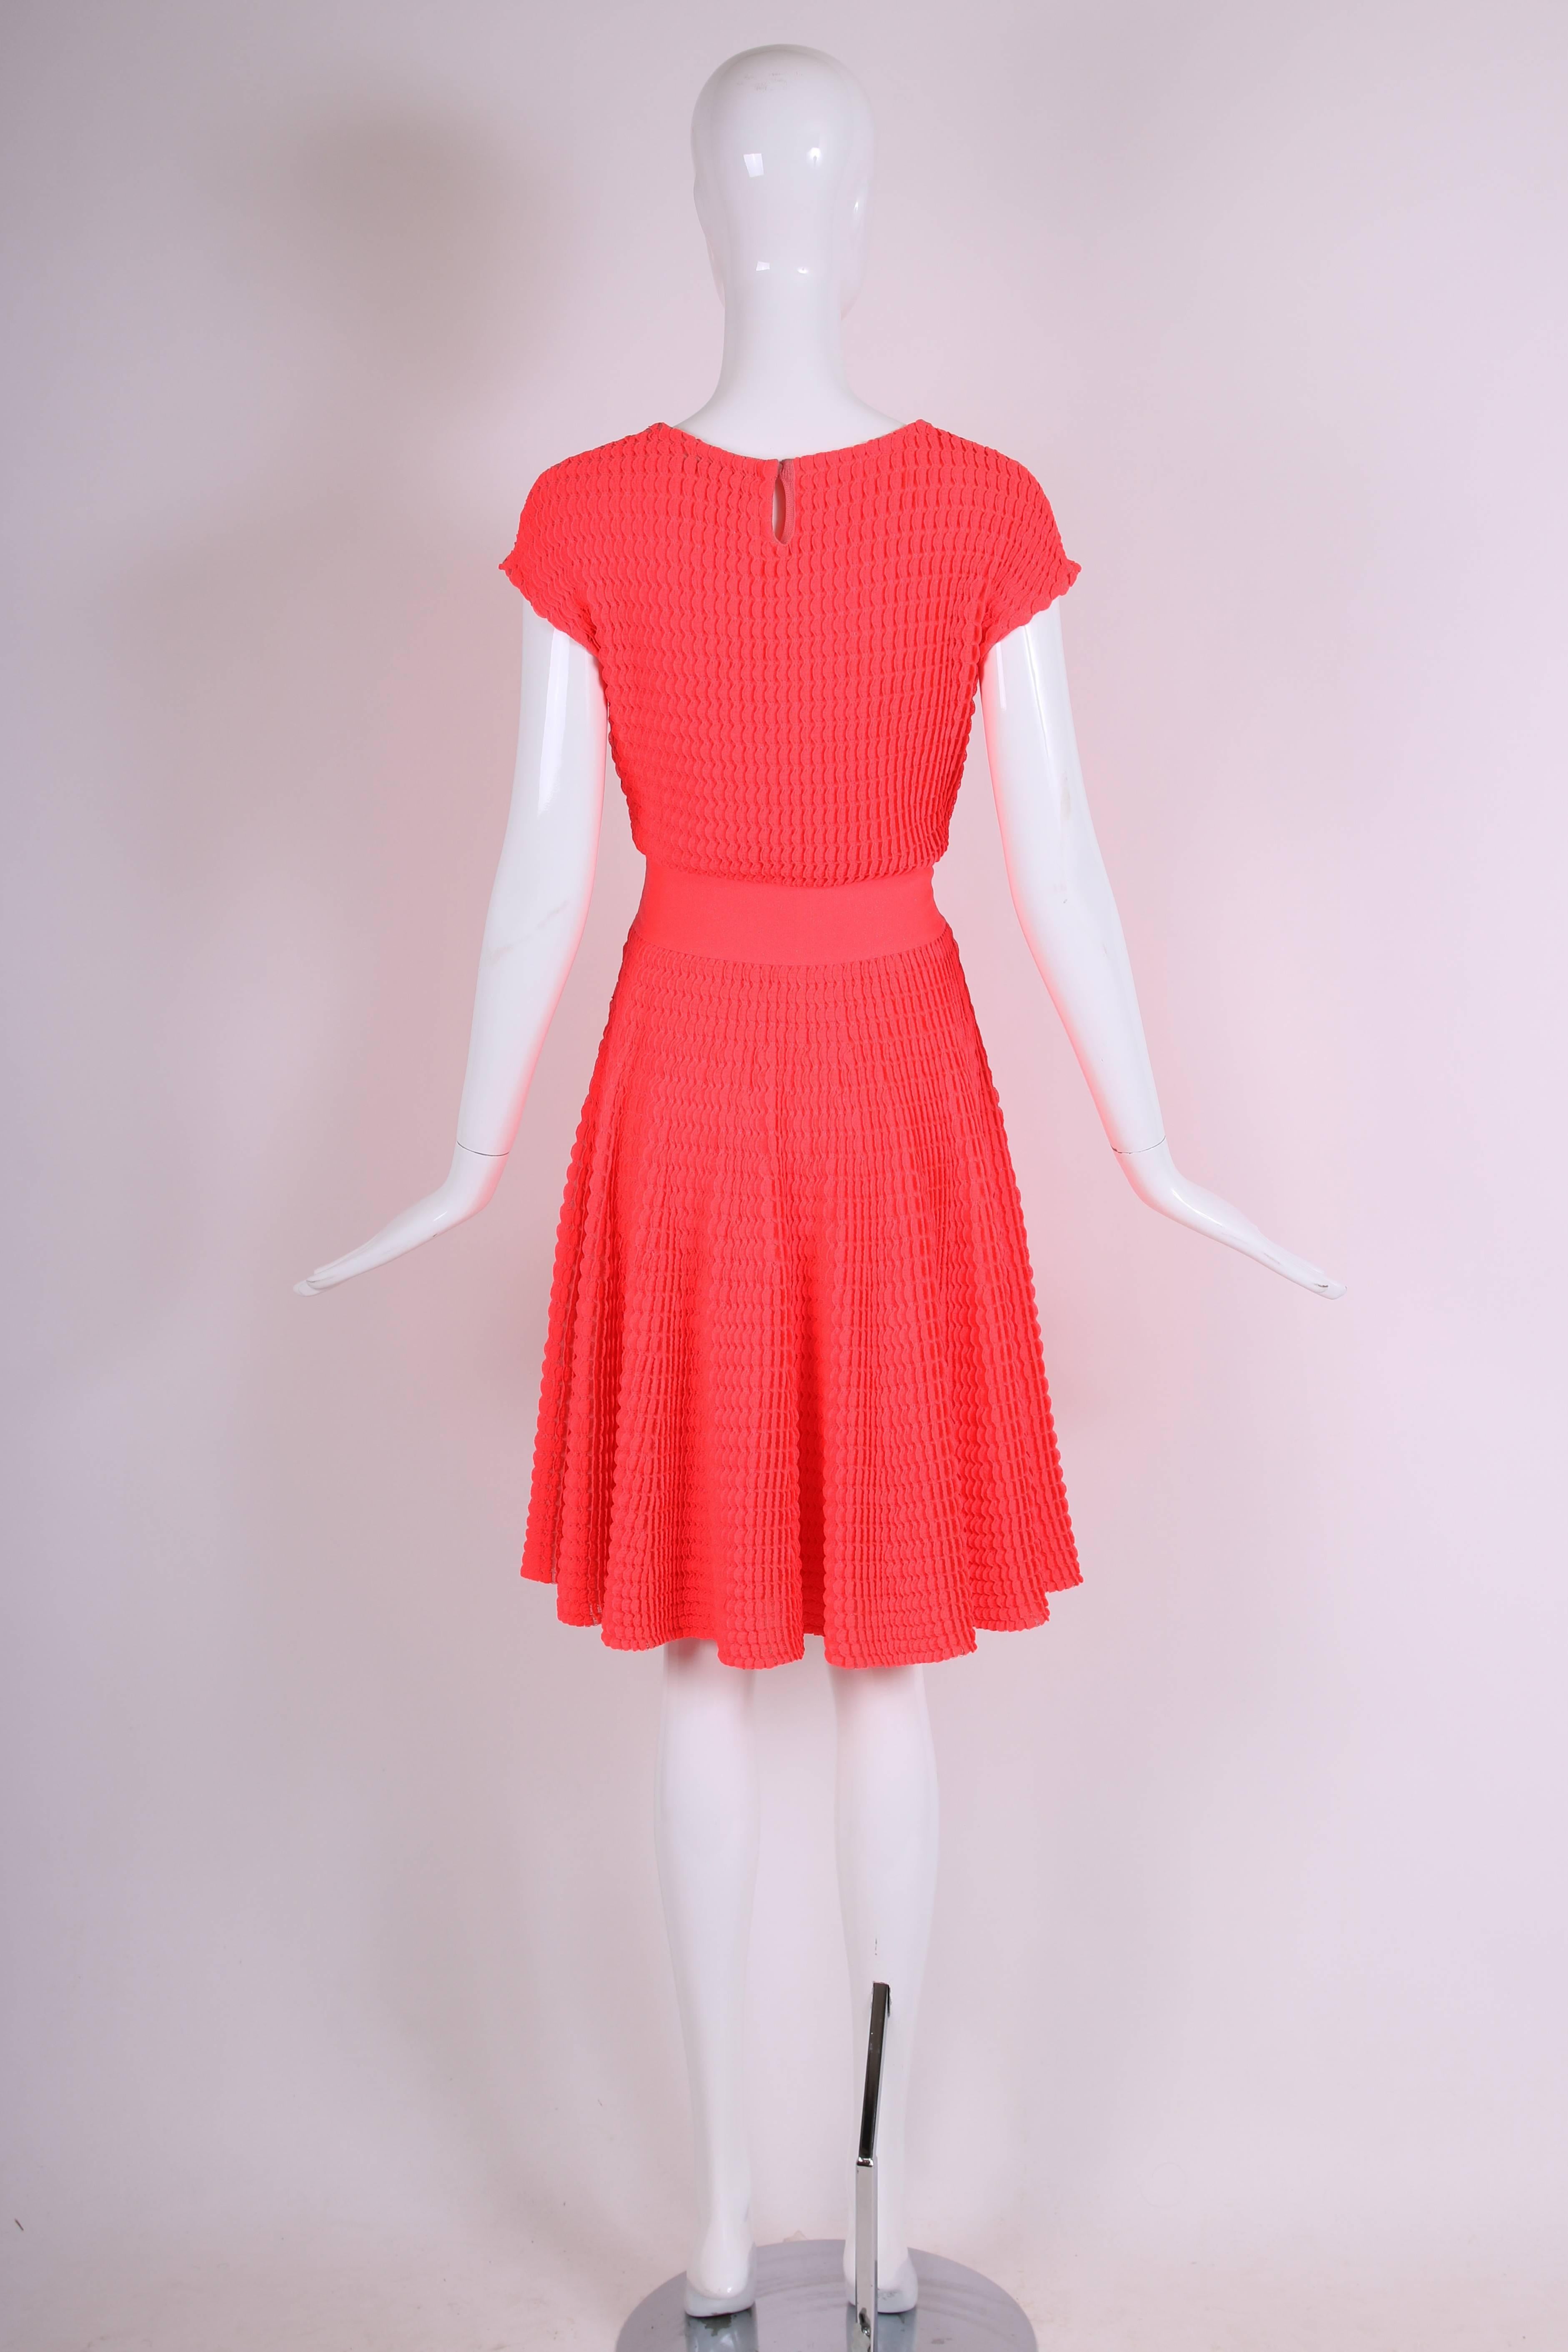 2013 Christian Dior by Raf Simons Neon Pink Textured Stretch Cocktail Day Dress 1